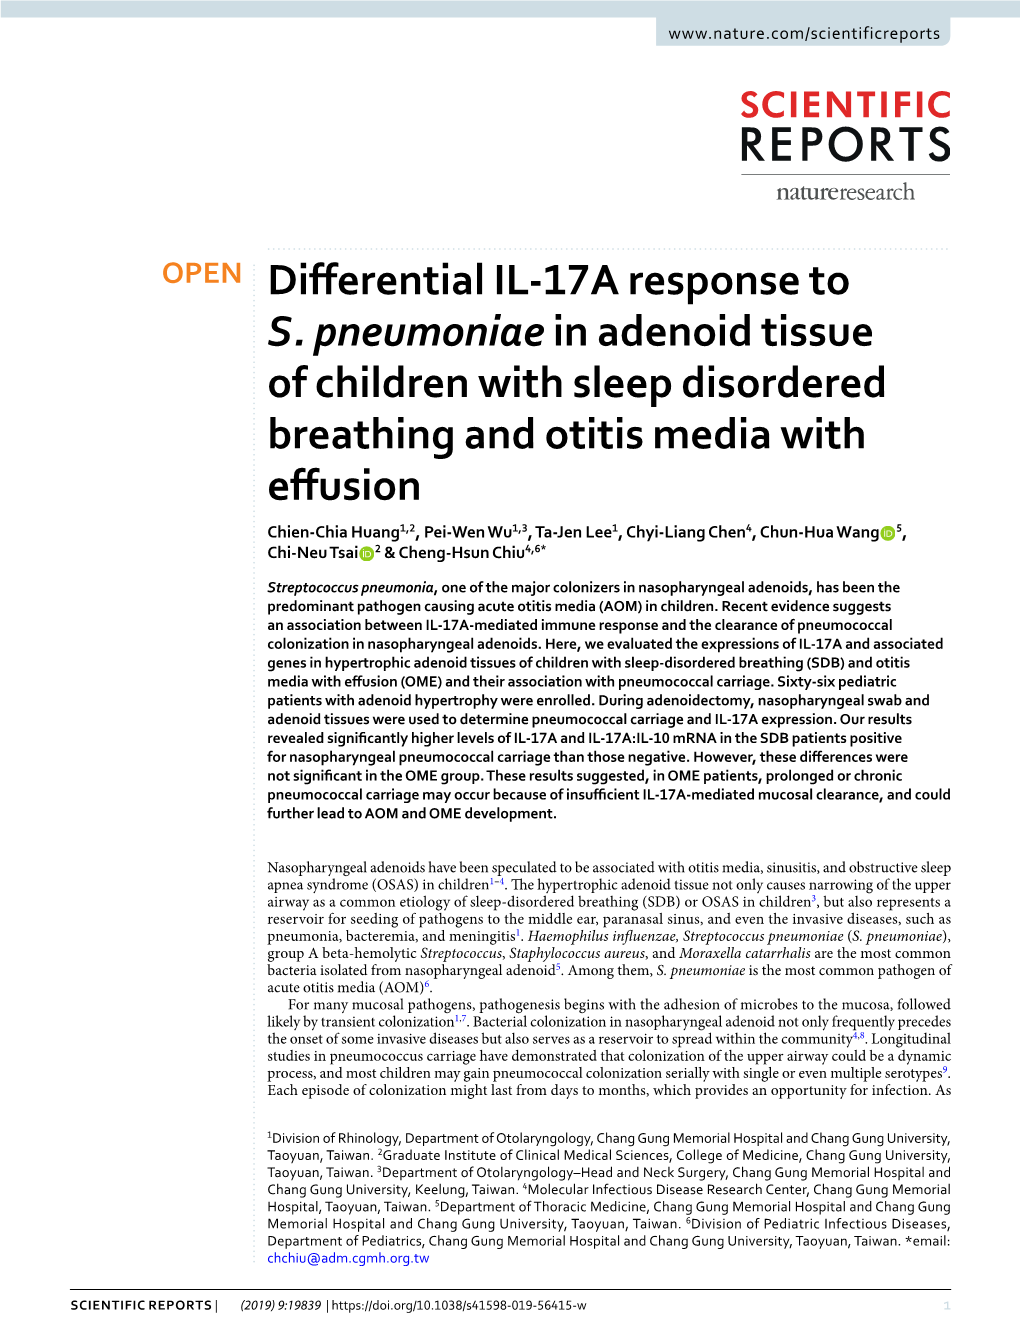 Differential IL-17A Response to S. Pneumoniae in Adenoid Tissue Of